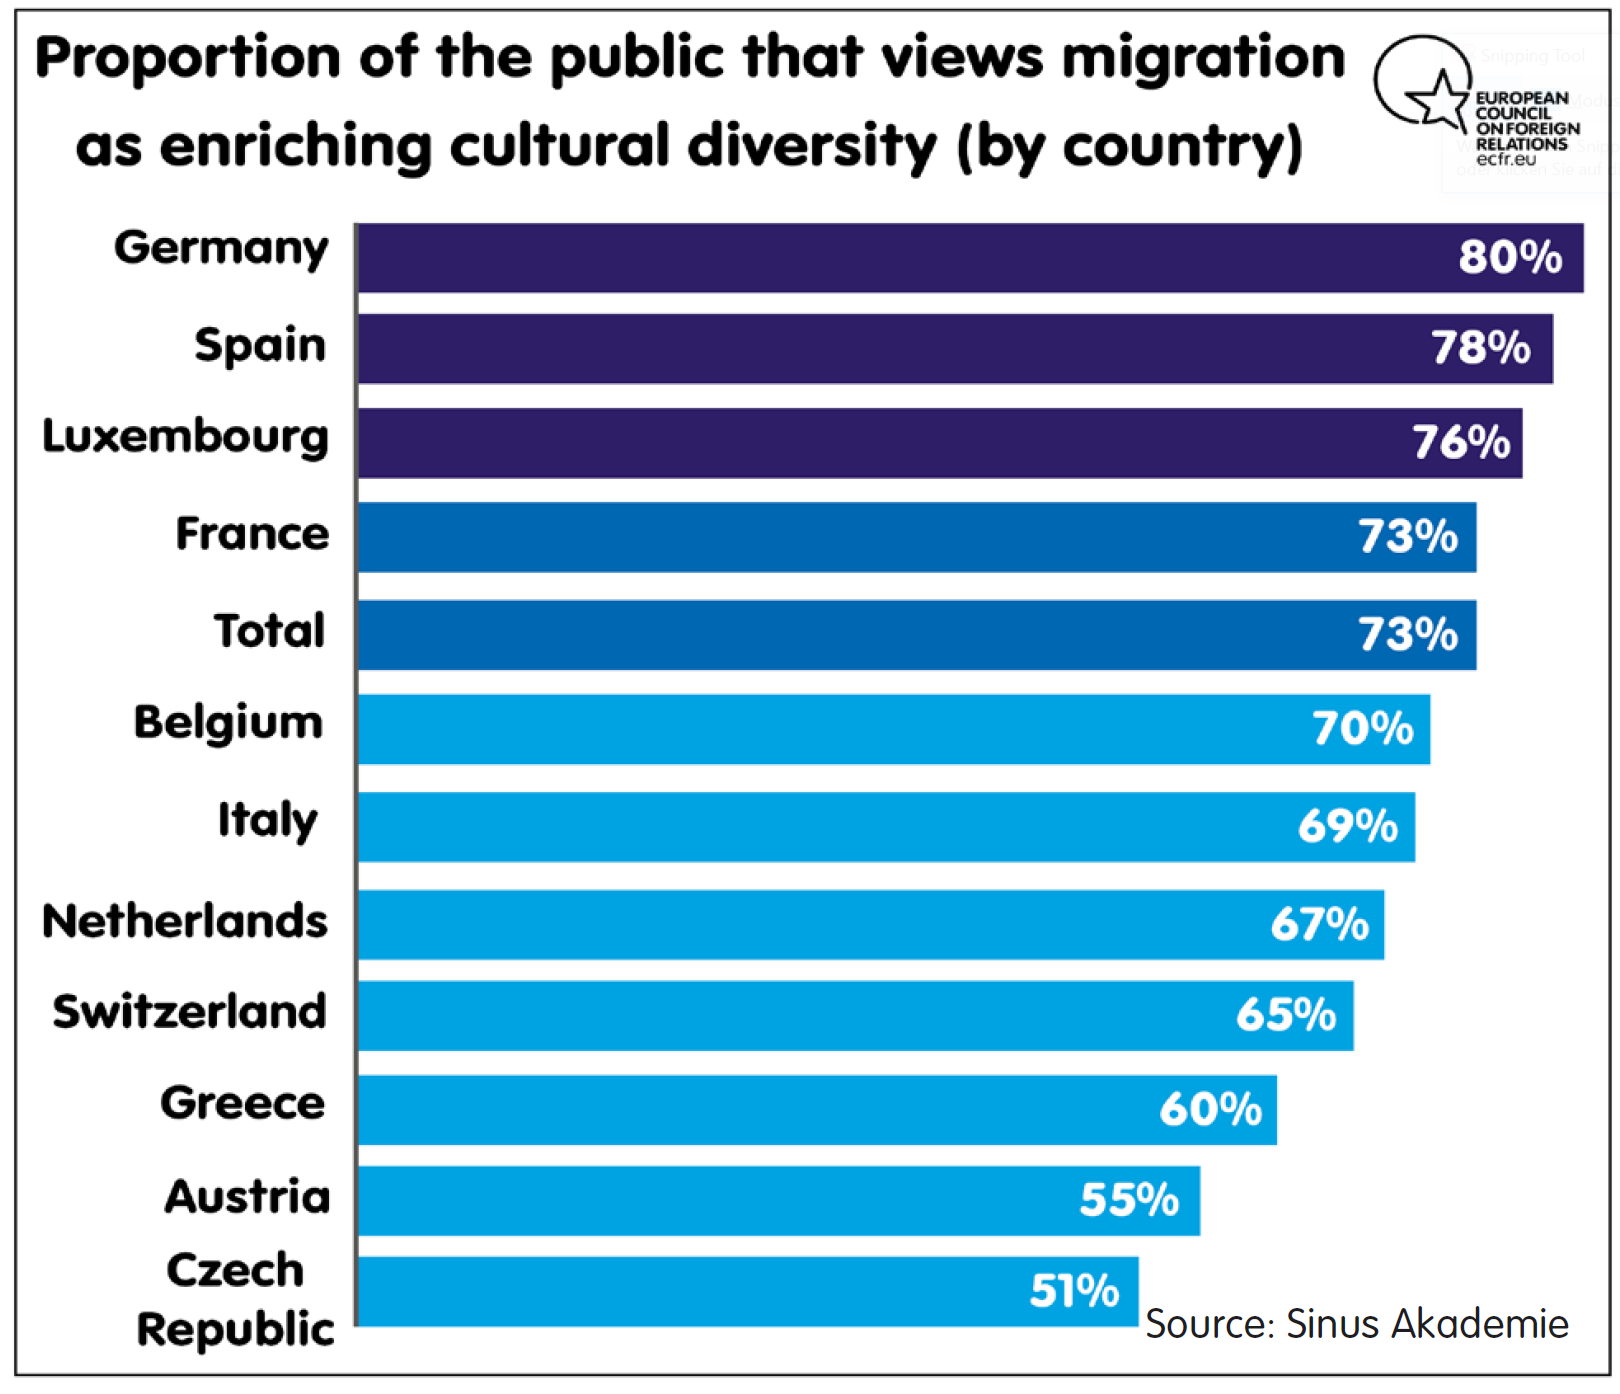 Proportion of the public that views migration as enrichting